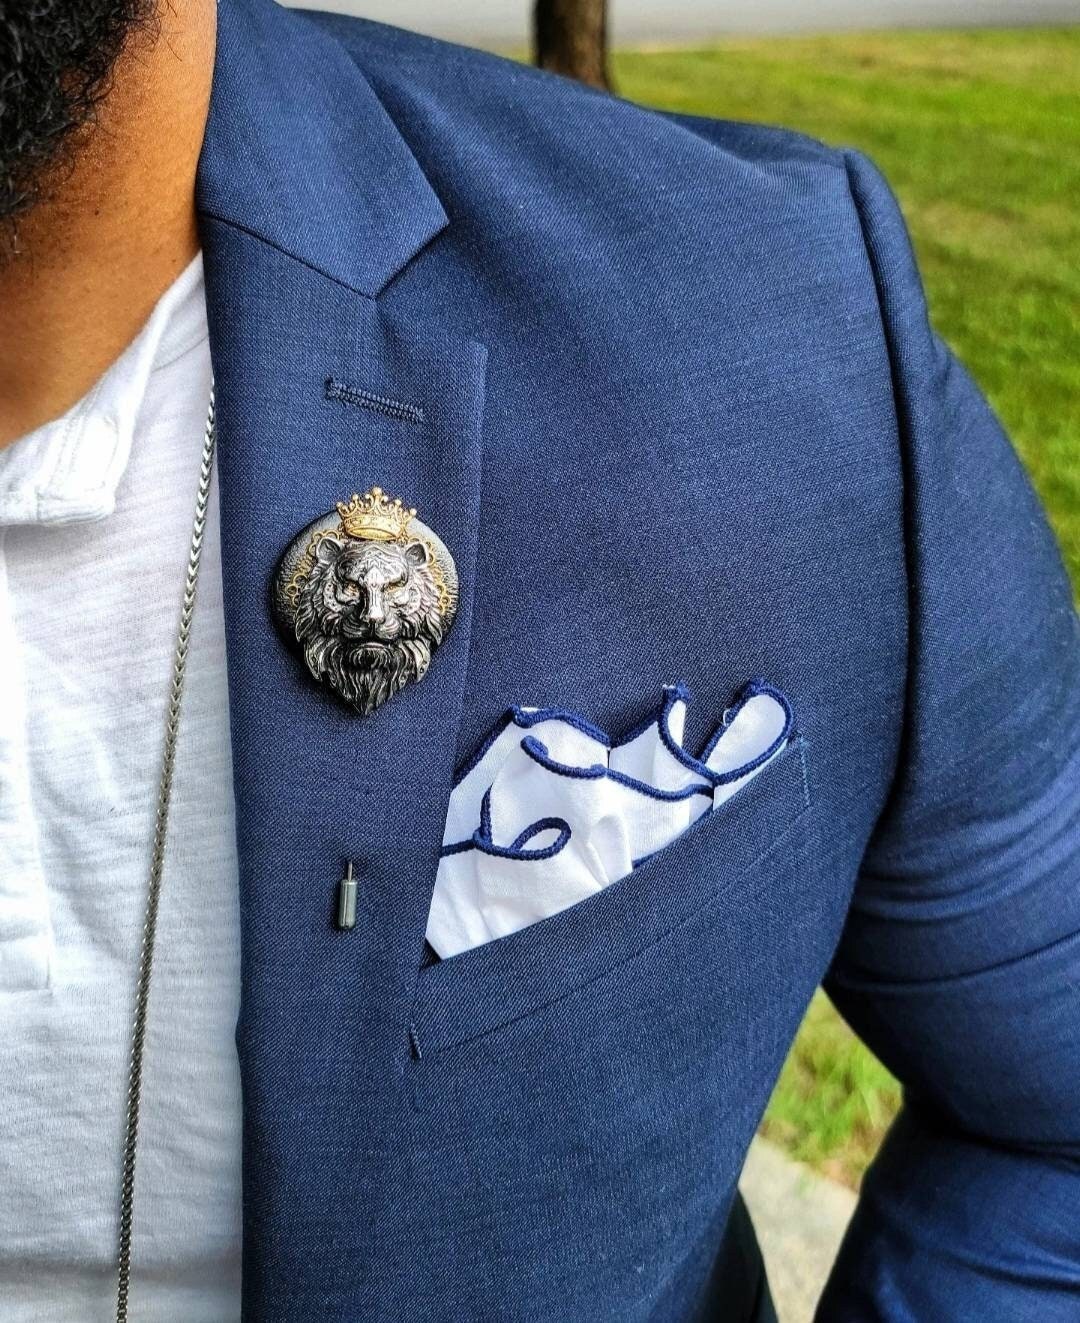 Animal Pattern Lapel Pin Brooch - Lion Head Shape for Men and Women's Suit  Coat. Perfect Party Corsage Accessory. (116 characters)